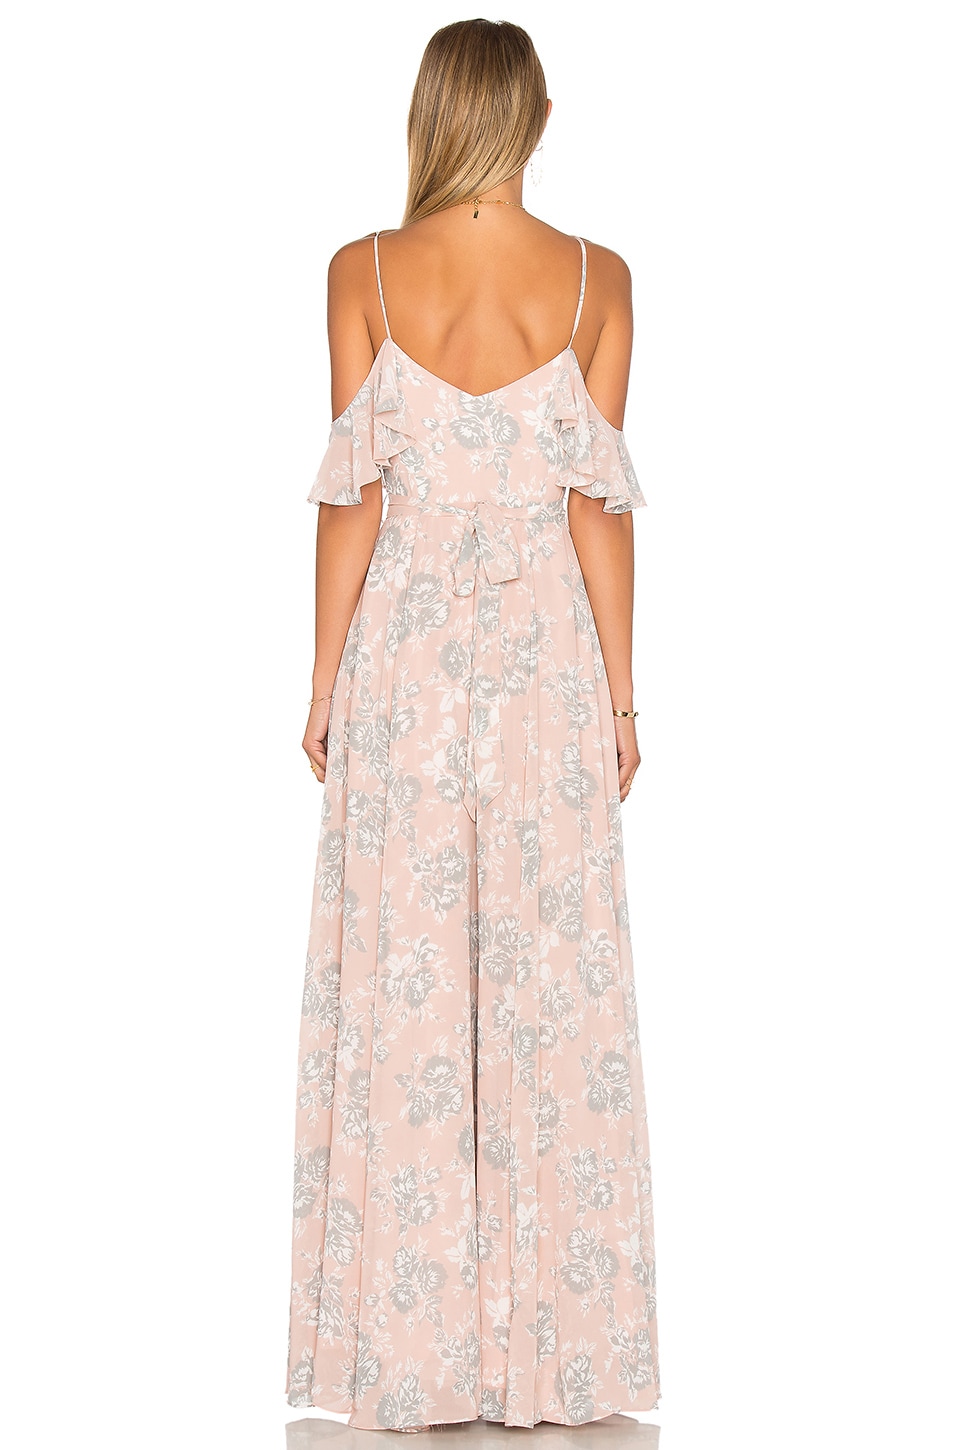 Lovers + Friends Taylor Gown in Floral | REVOLVE